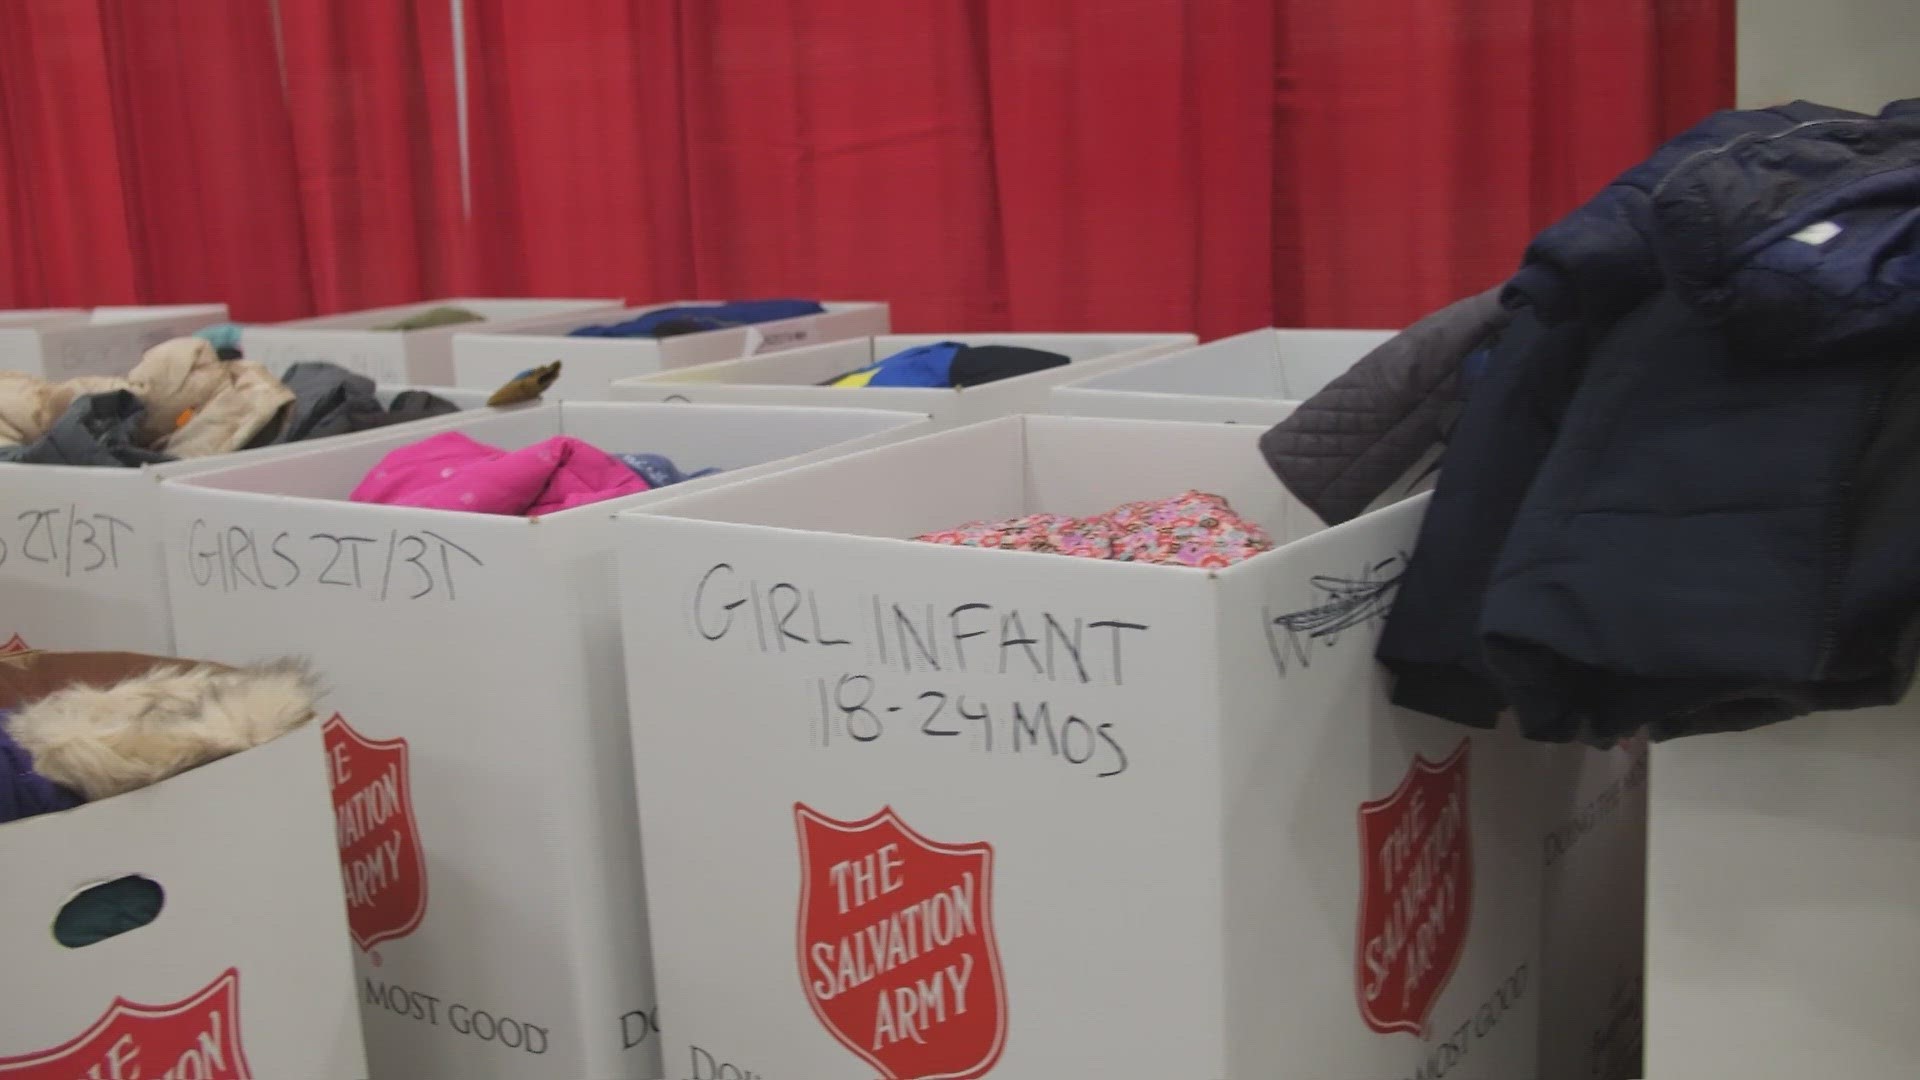 About 4,000 families have signed up for a coat. The Salvation Army says that's a big increase.